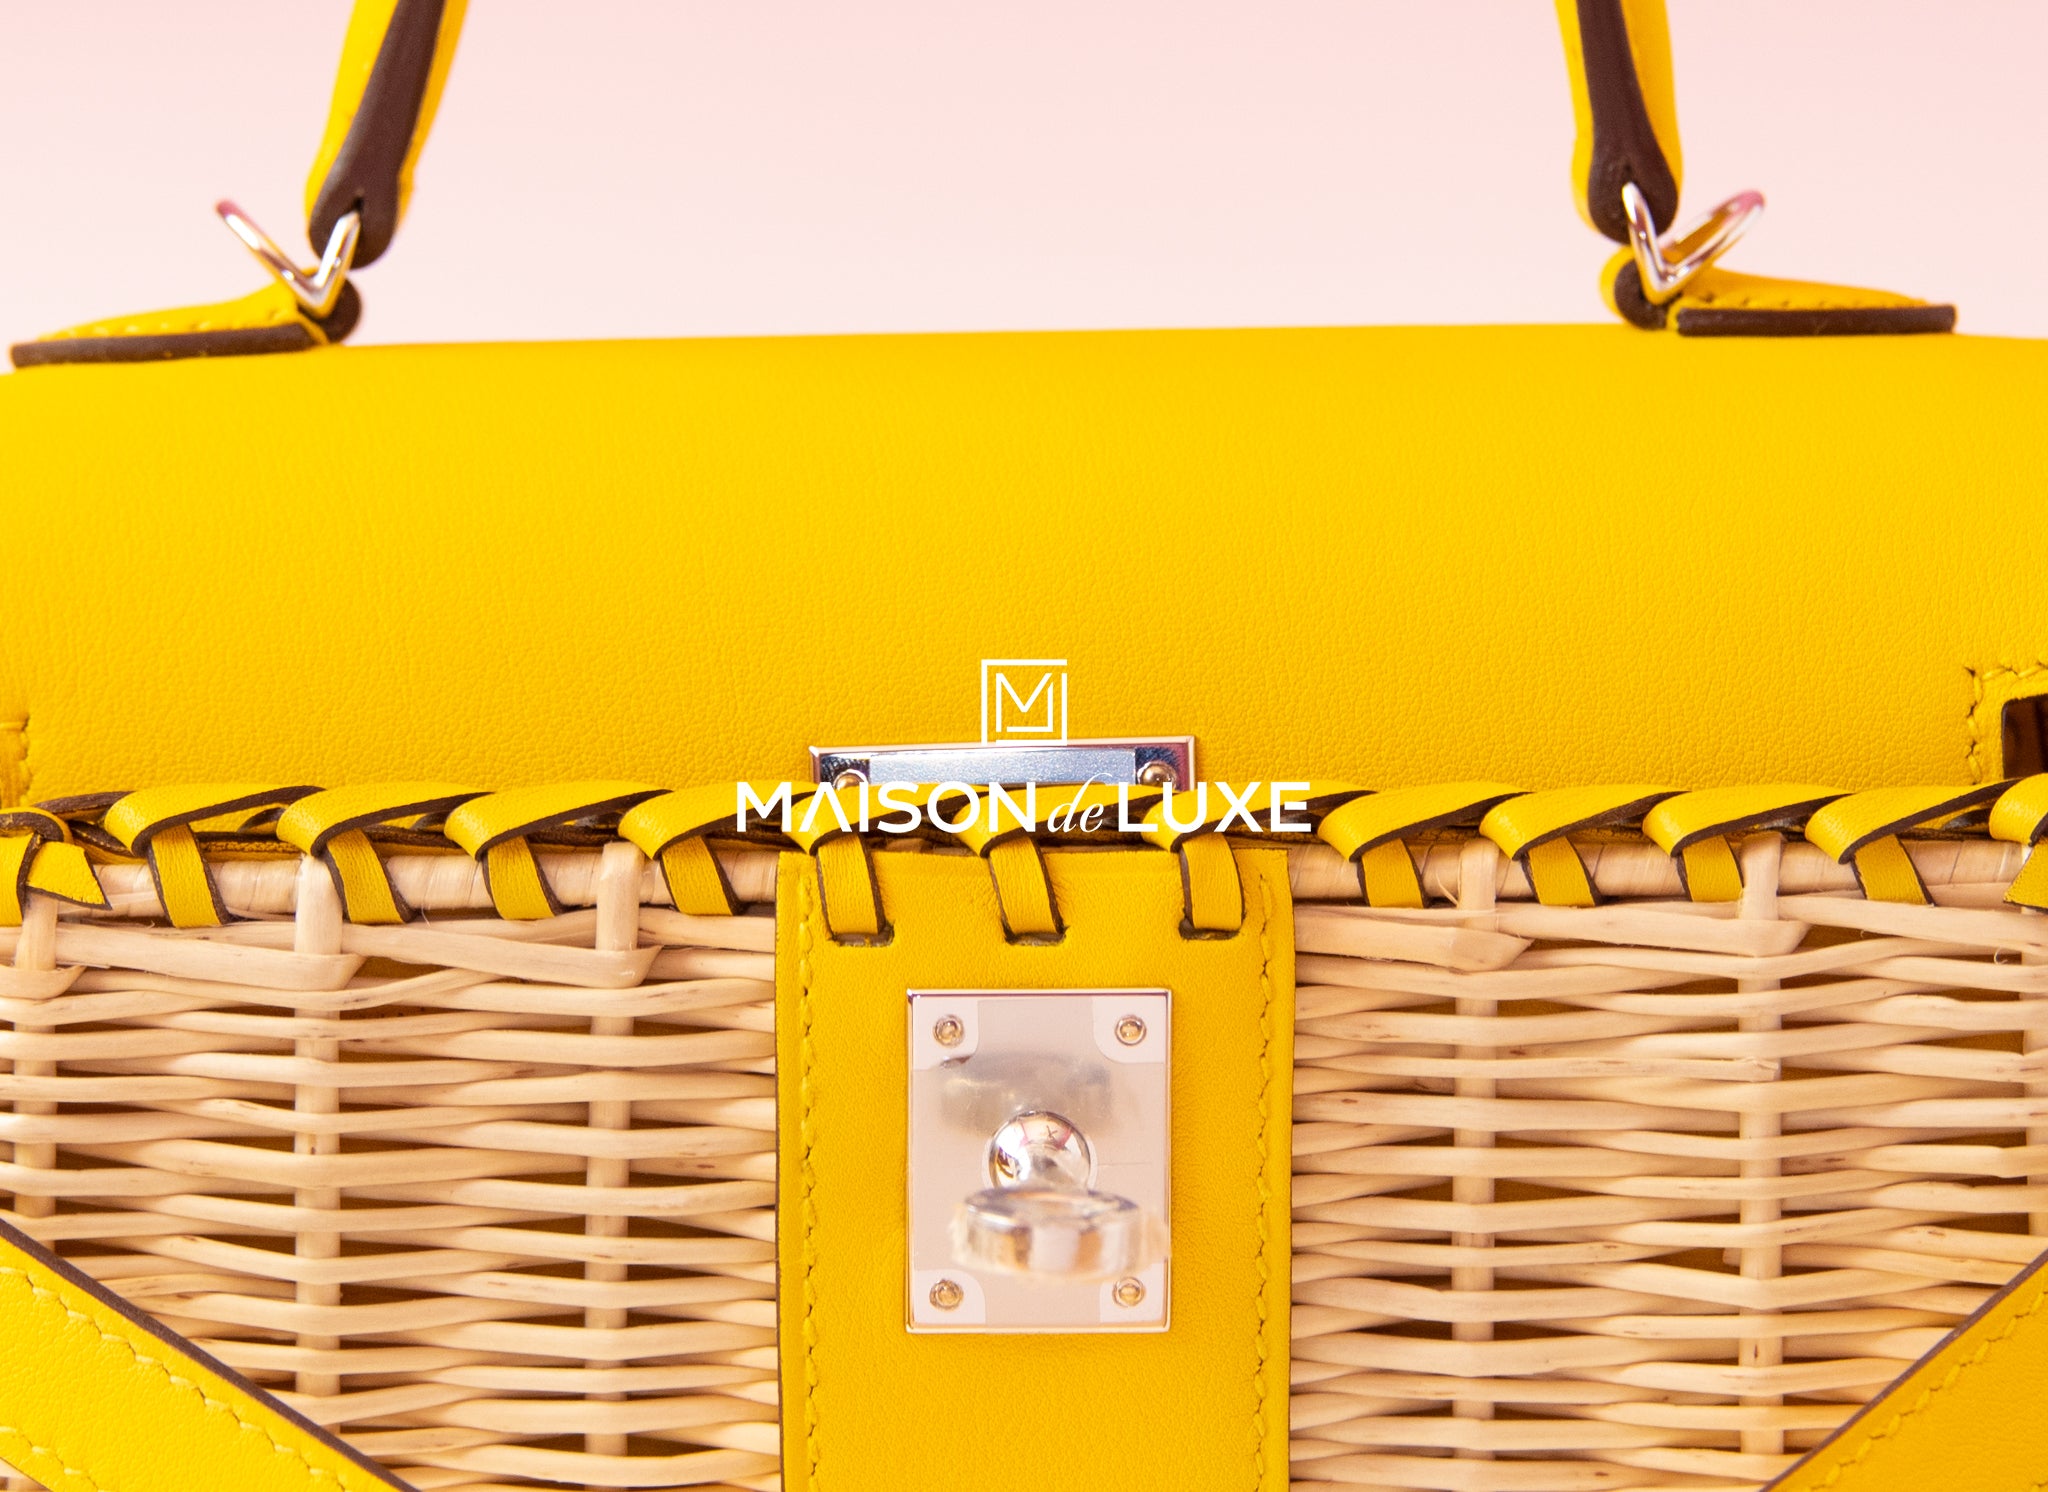 Hermès Jaune De Naples Swift And Osier Wicker Mini Picnic Kelly 20  Palladium Hardware, 2019 Available For Immediate Sale At Sotheby's